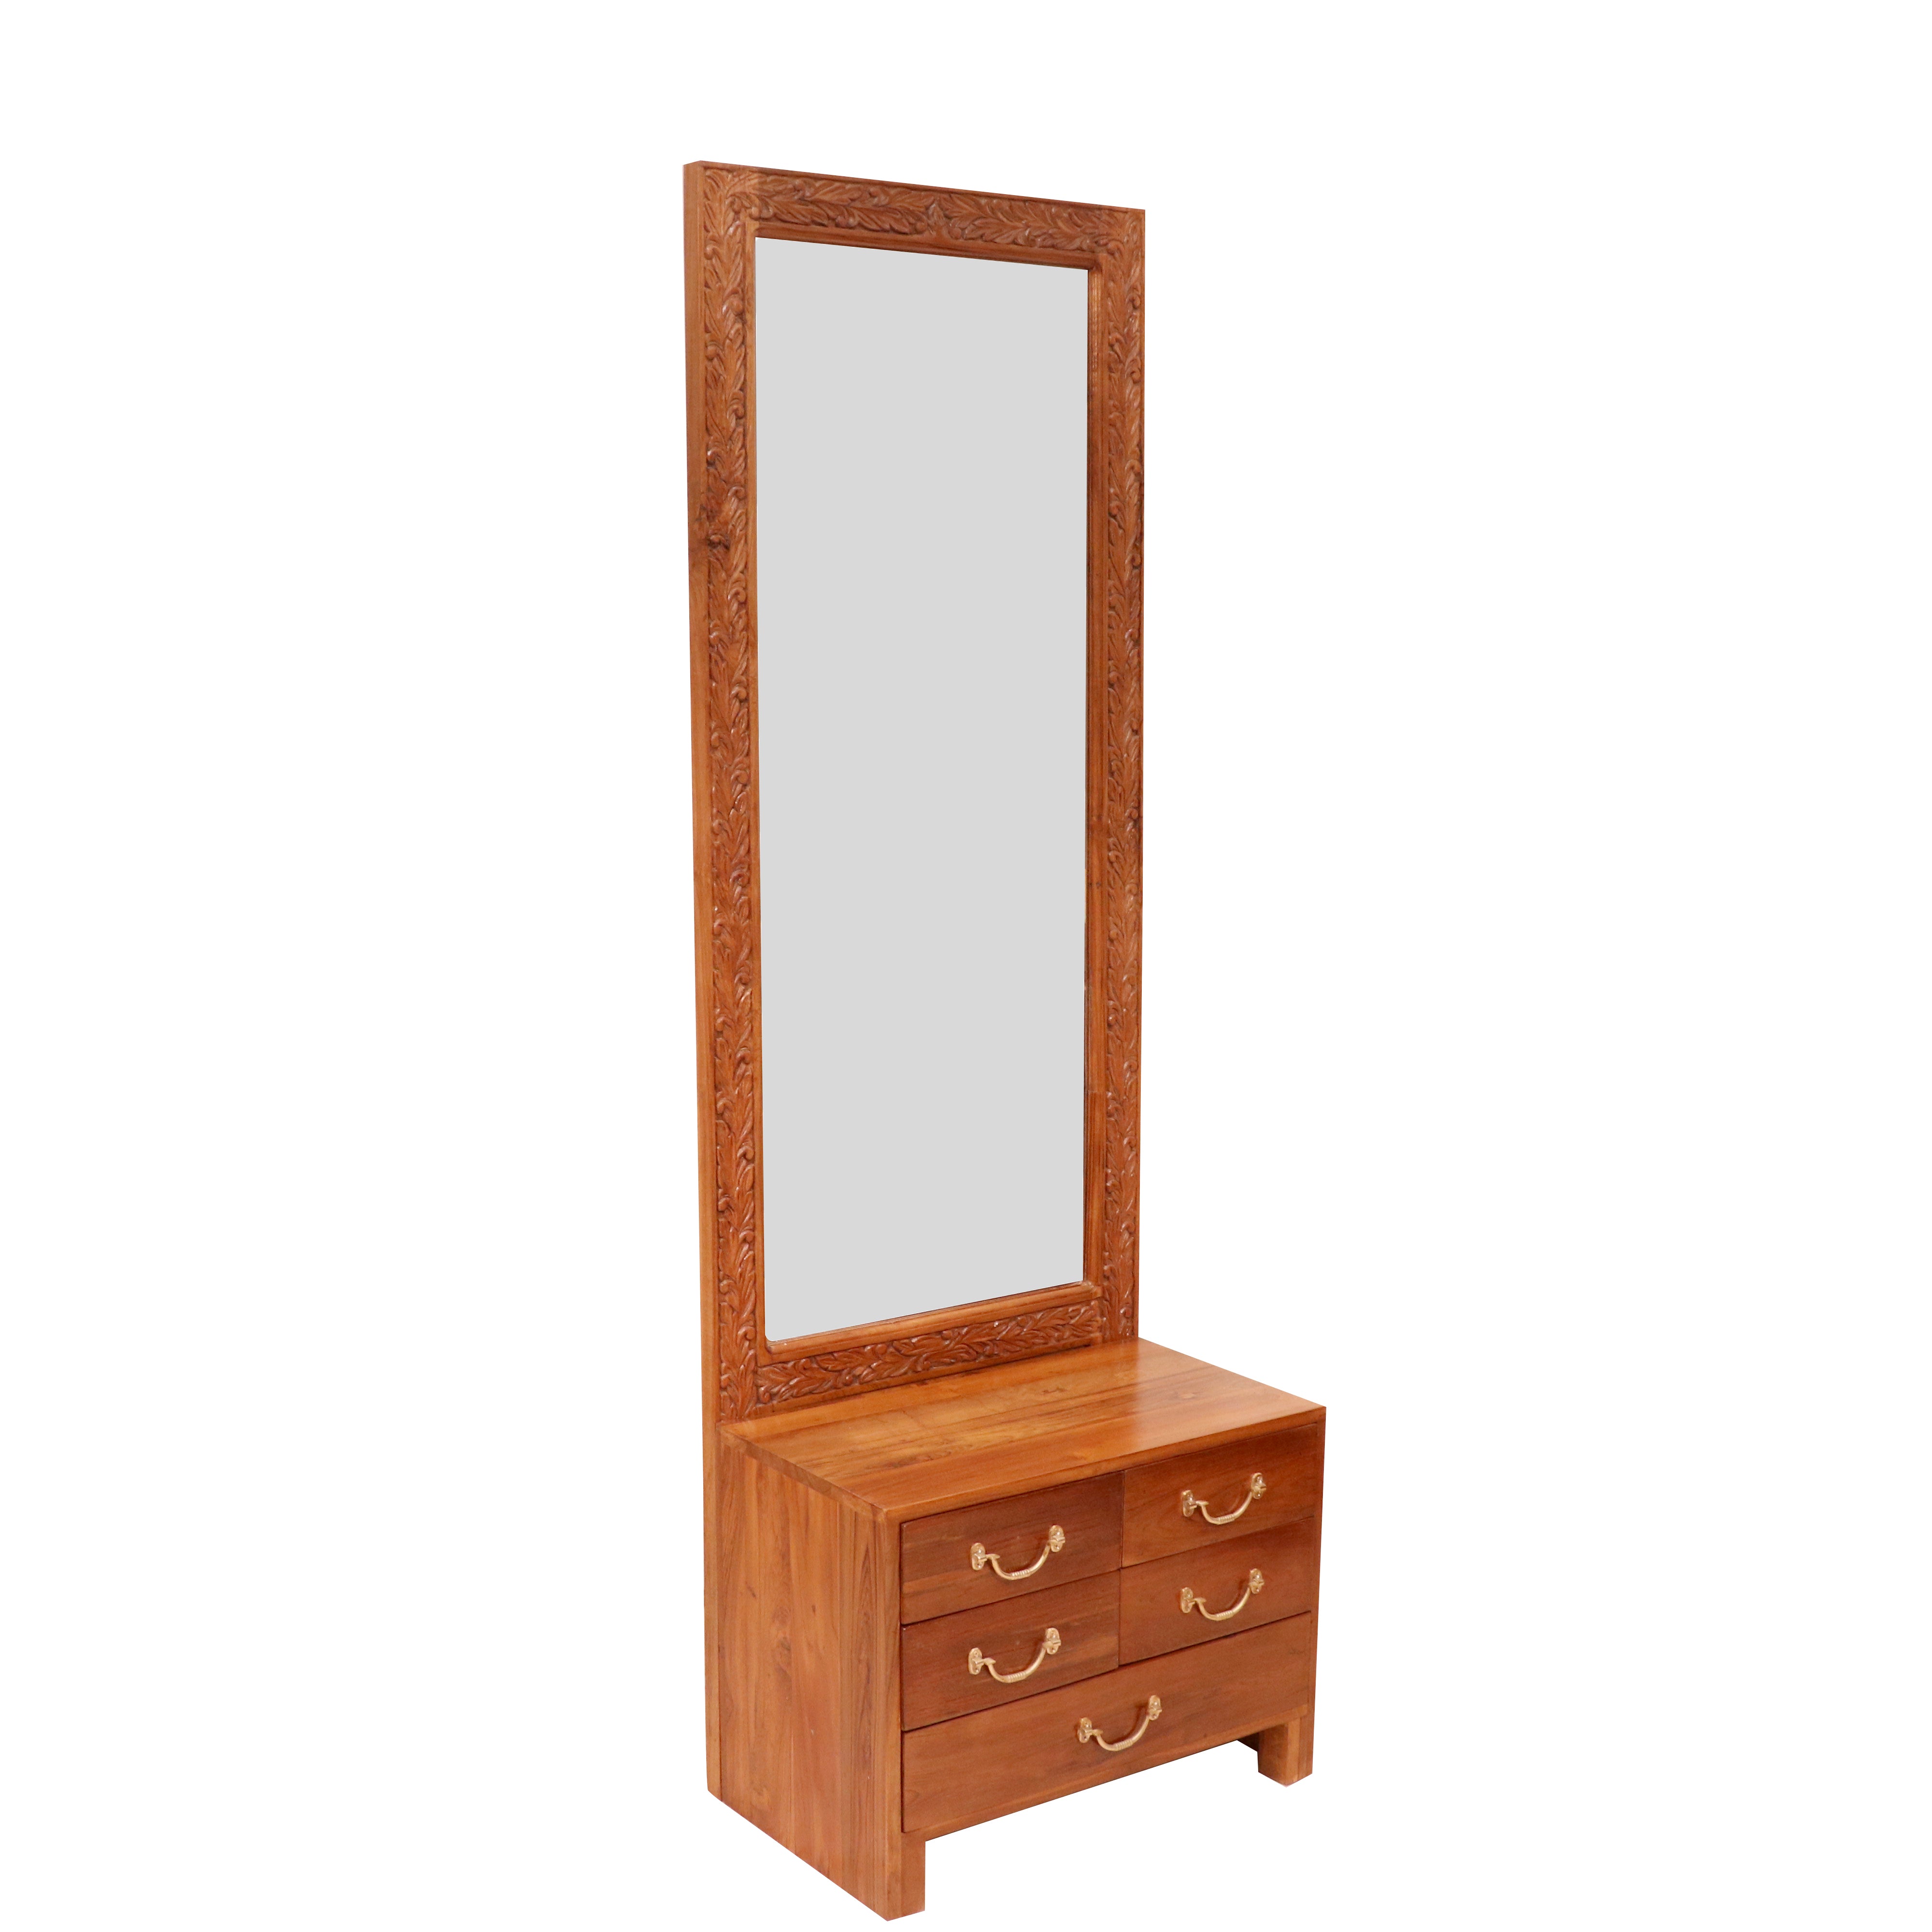 Solid teak wood carved mirror frame with 5 drawer Dressing table Dressing Table